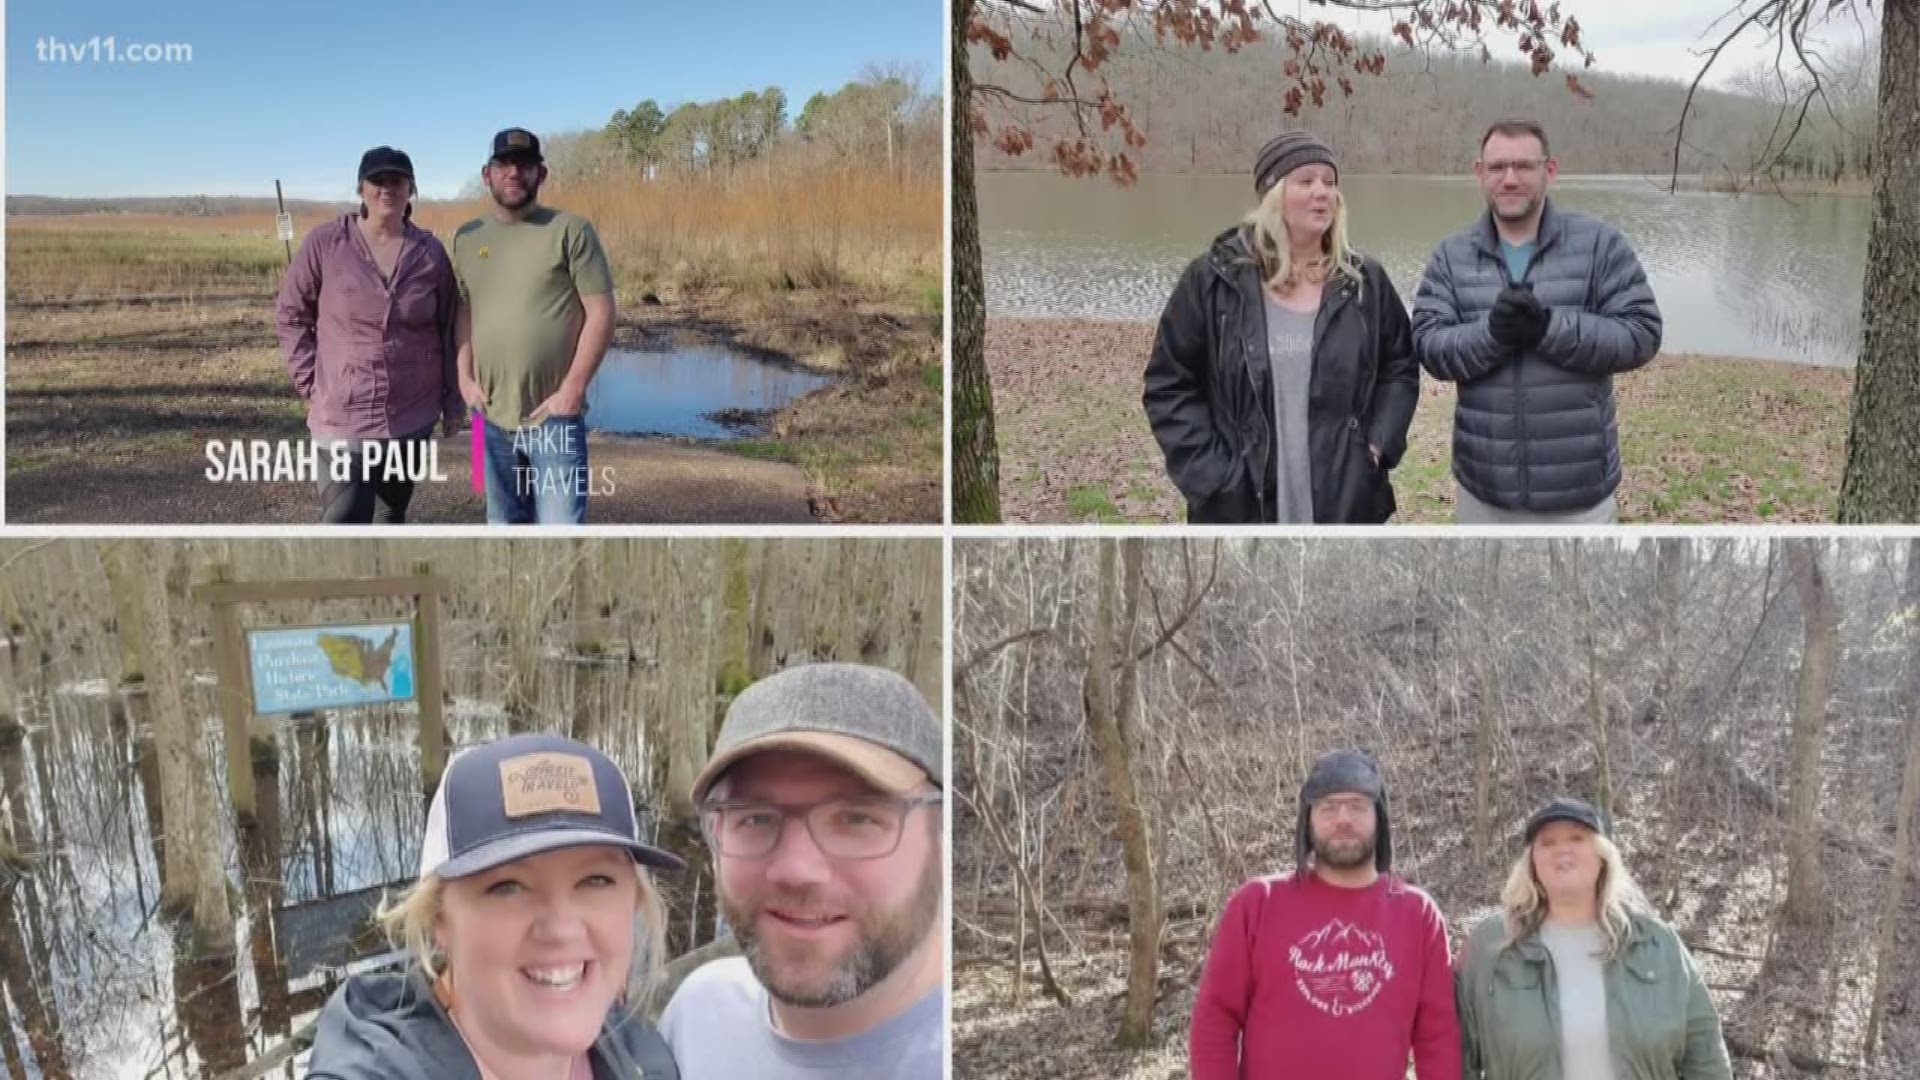 We meet the husband and wife team behind the vlog Arkie Travels, they visit dozens of places here in Arkansas.